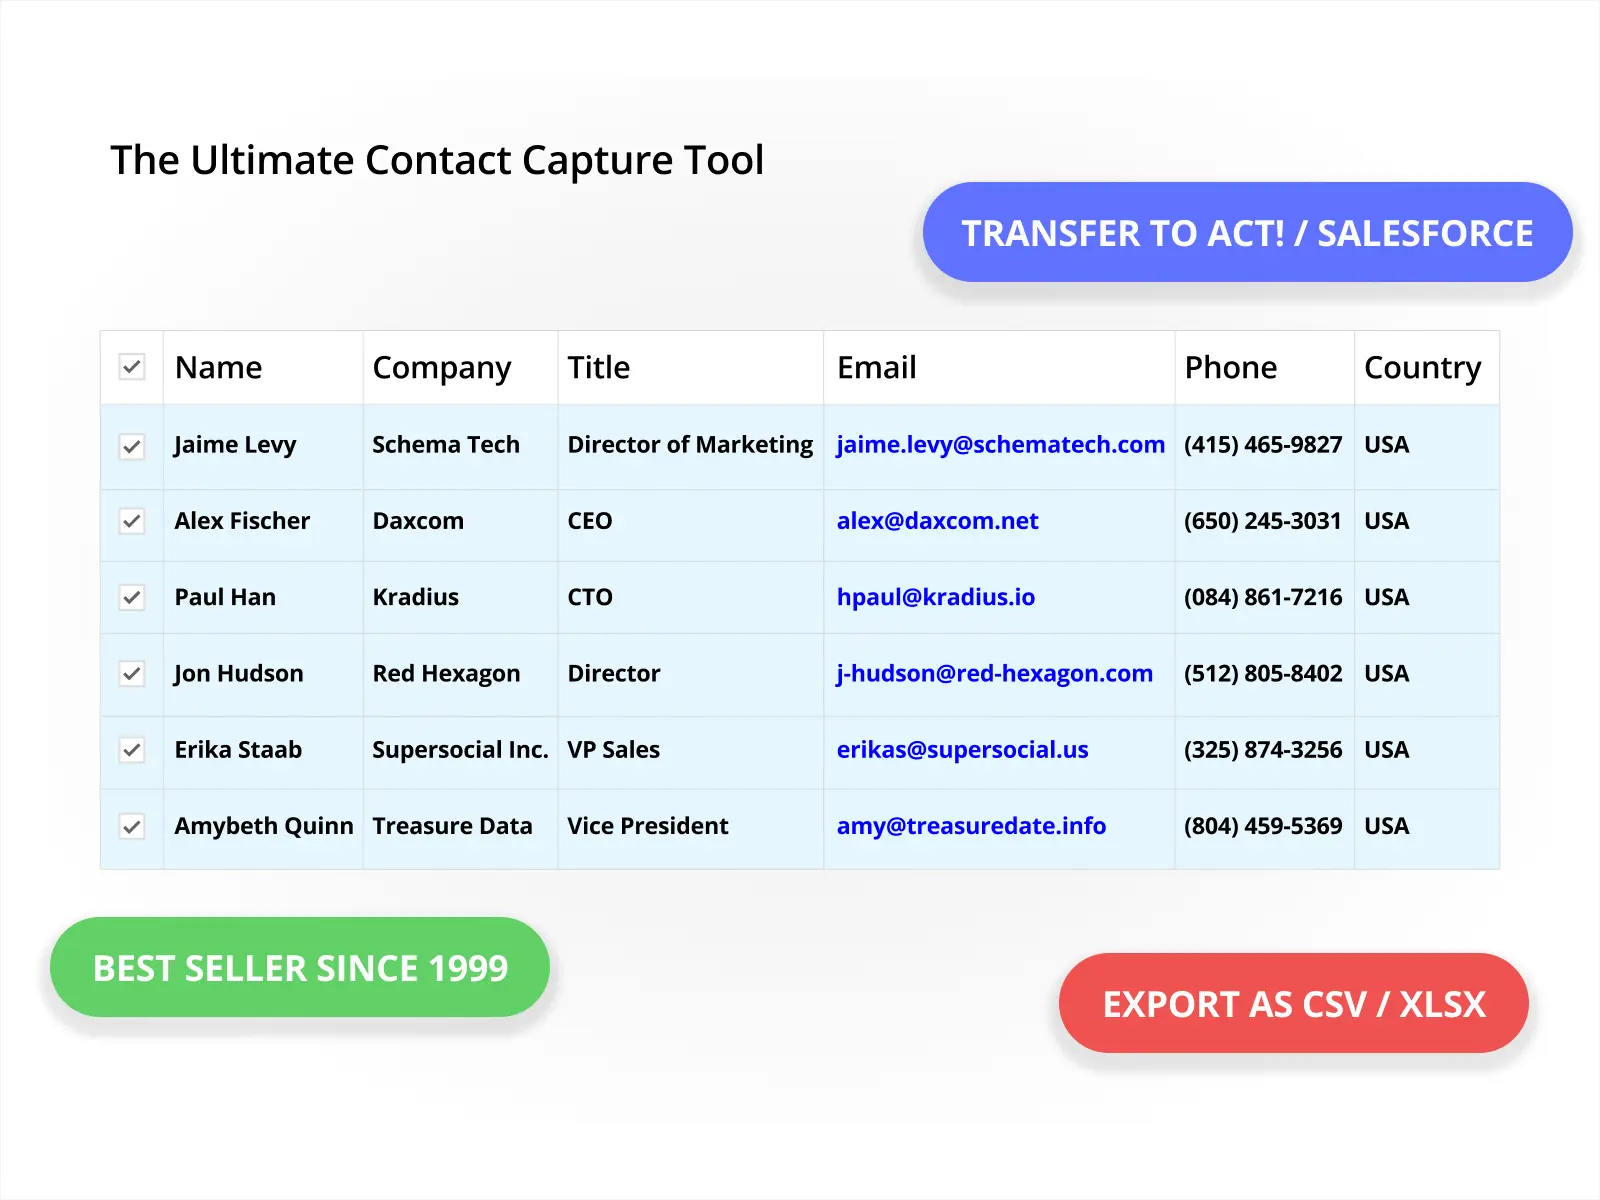 The fastest way to extract contact details